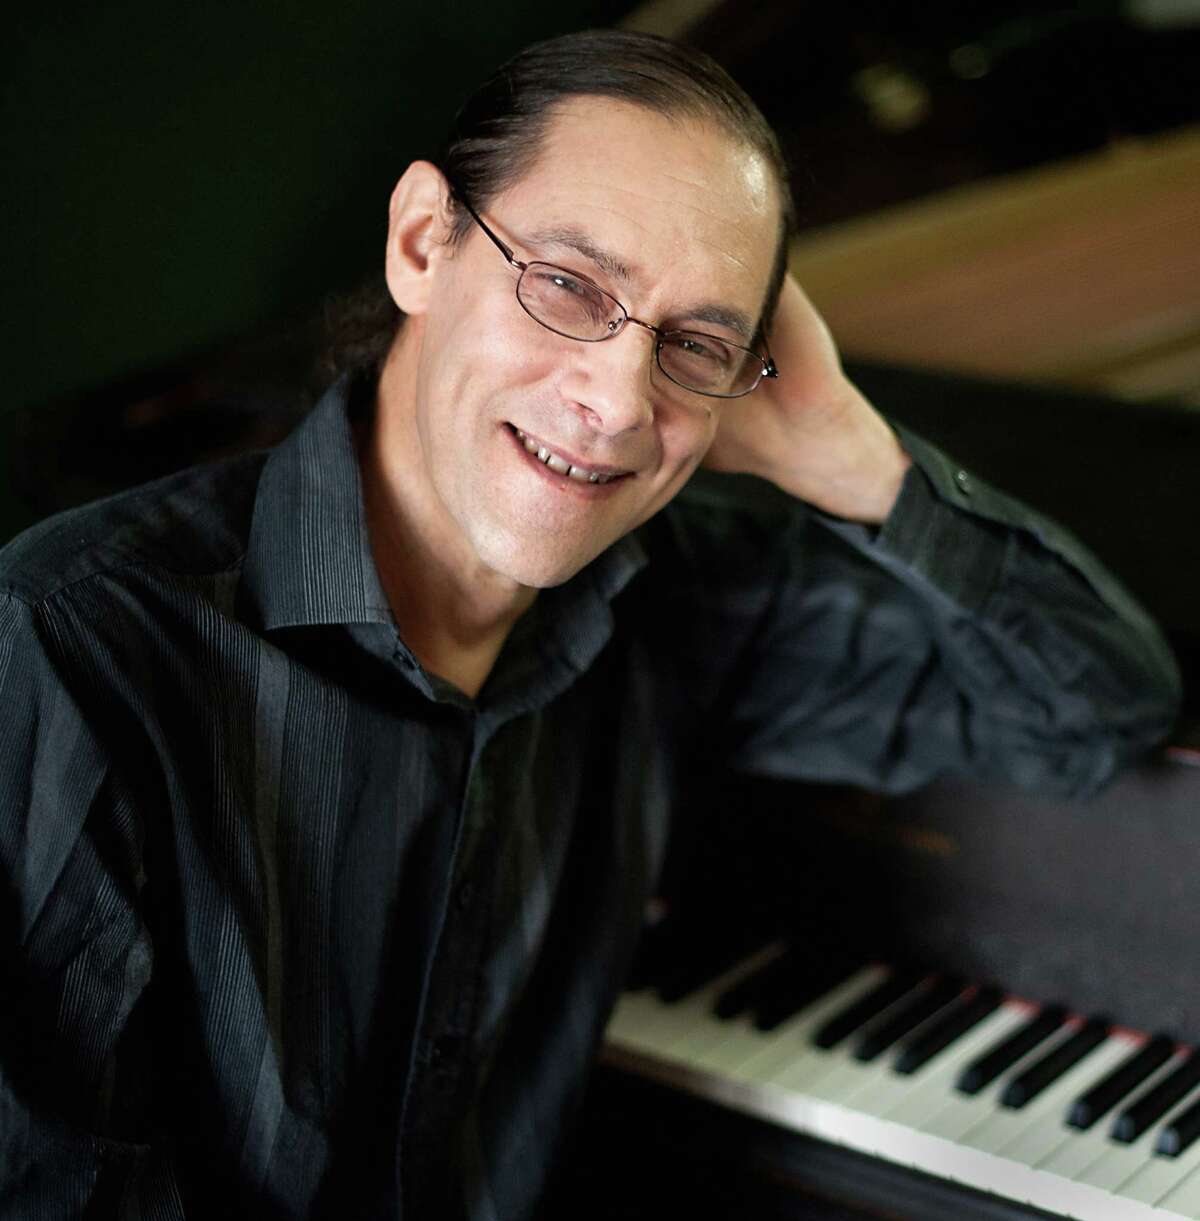 Bob Gluck's life as a conservatory student was blown wide open in 1970 when he first encountered "Bitches Brew," one of many landmark recordings by Miles Davis. Today, Gluck is more than just another avid fan. He's a pianist, composer and musicologist and has been on the faculty at the University at Albany since 2003. (Paul Grupp and Brenda Rose)